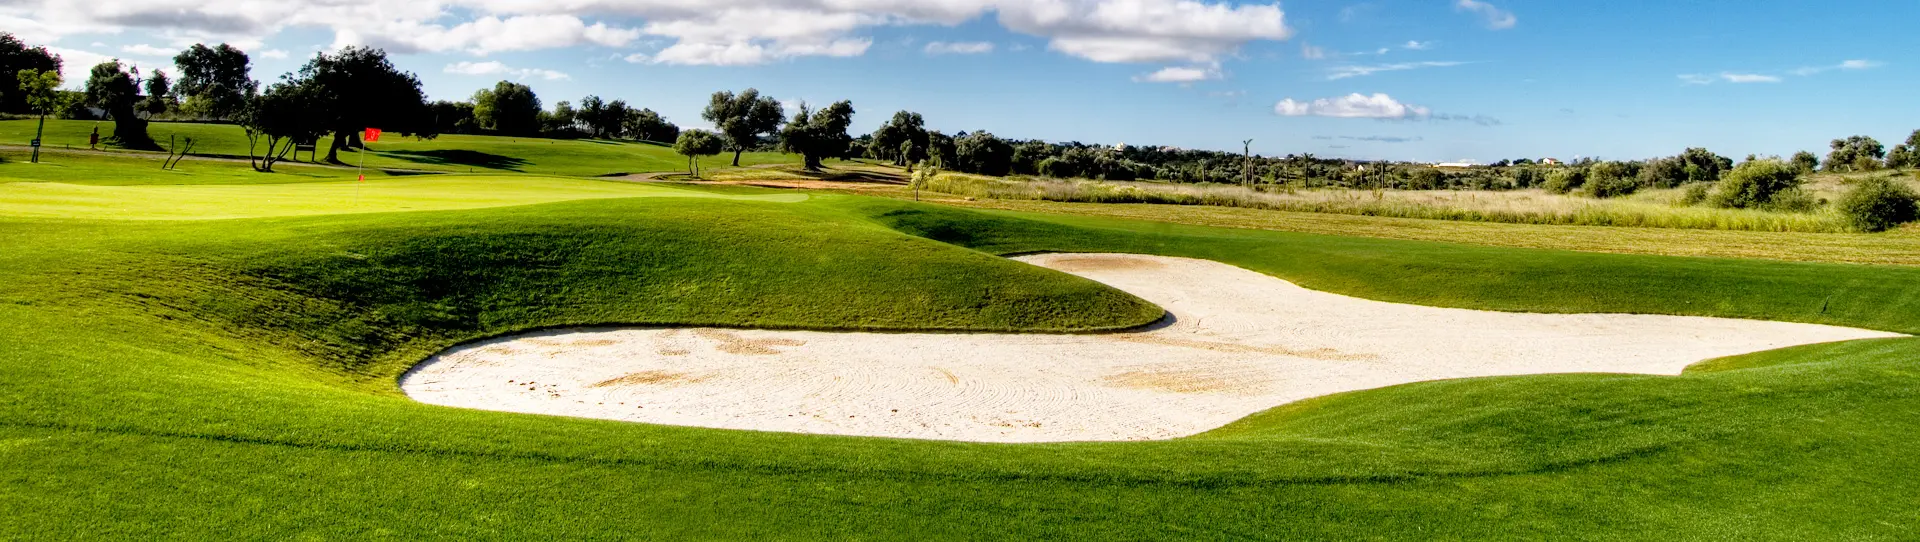 Portugal golf courses - Silves Golf Course - Photo 1